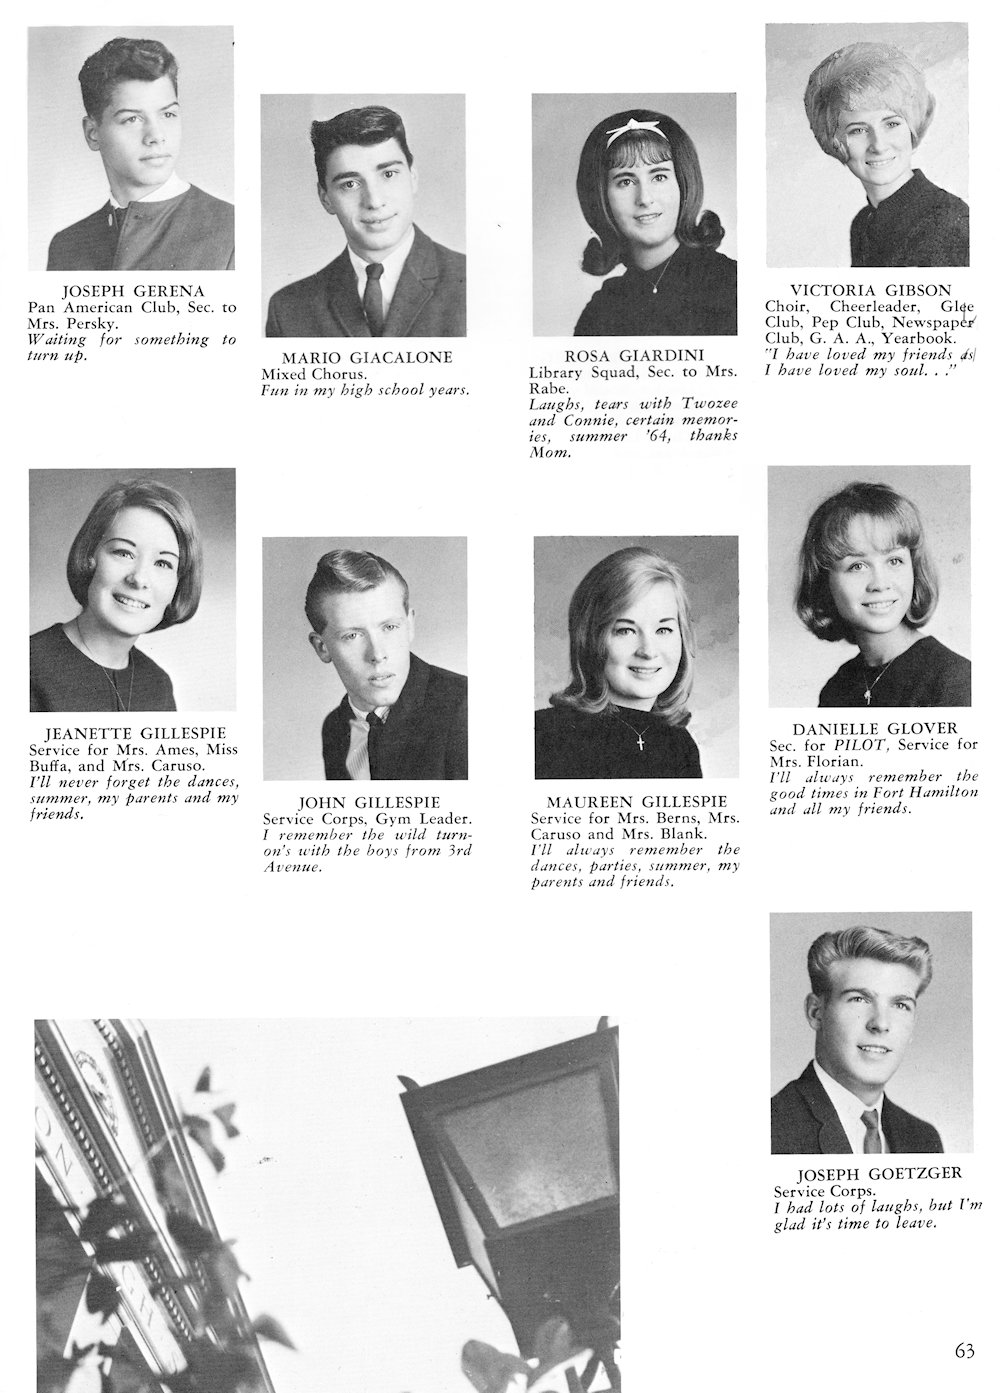 Gerena-Goetzger page from Fort Hamilton High School 1965